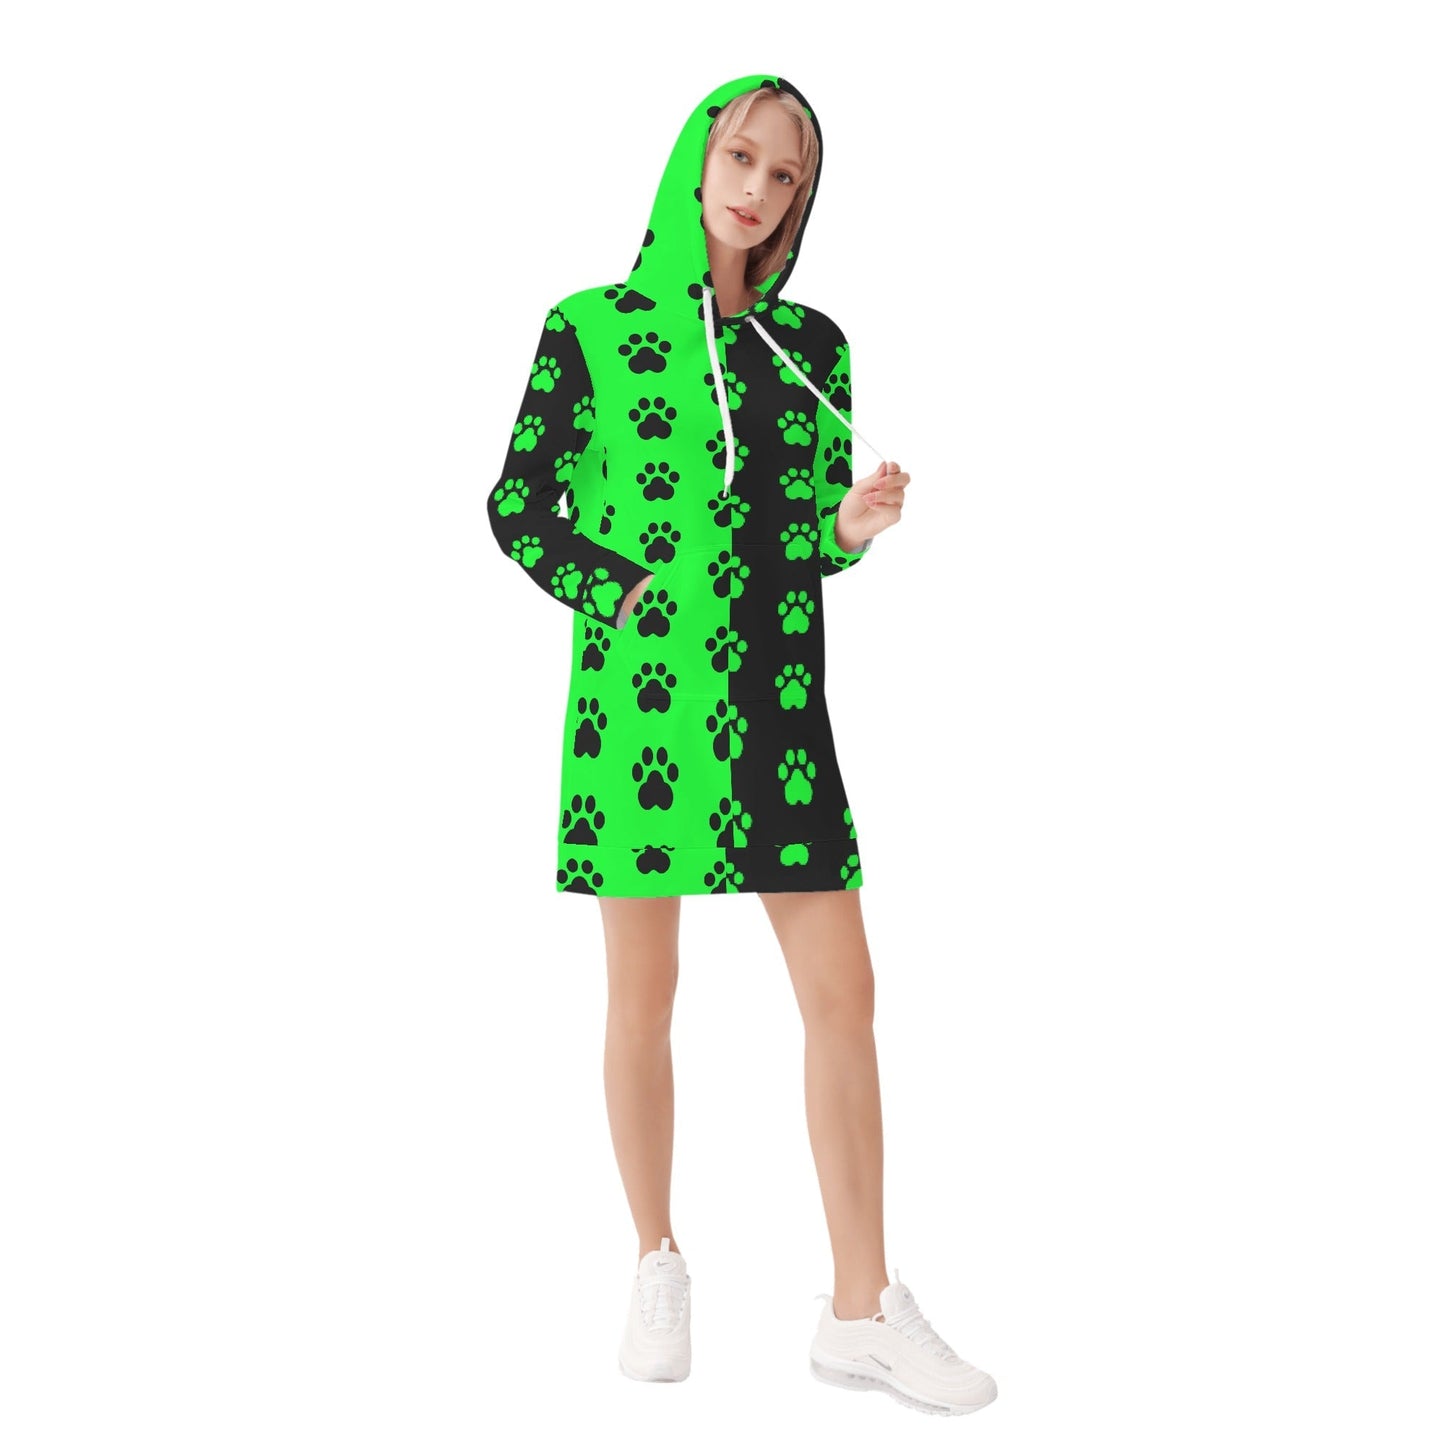 Stand out  with the  2 Tone Womens Hoodie Dress  available at Hey Nugget. Grab yours today!